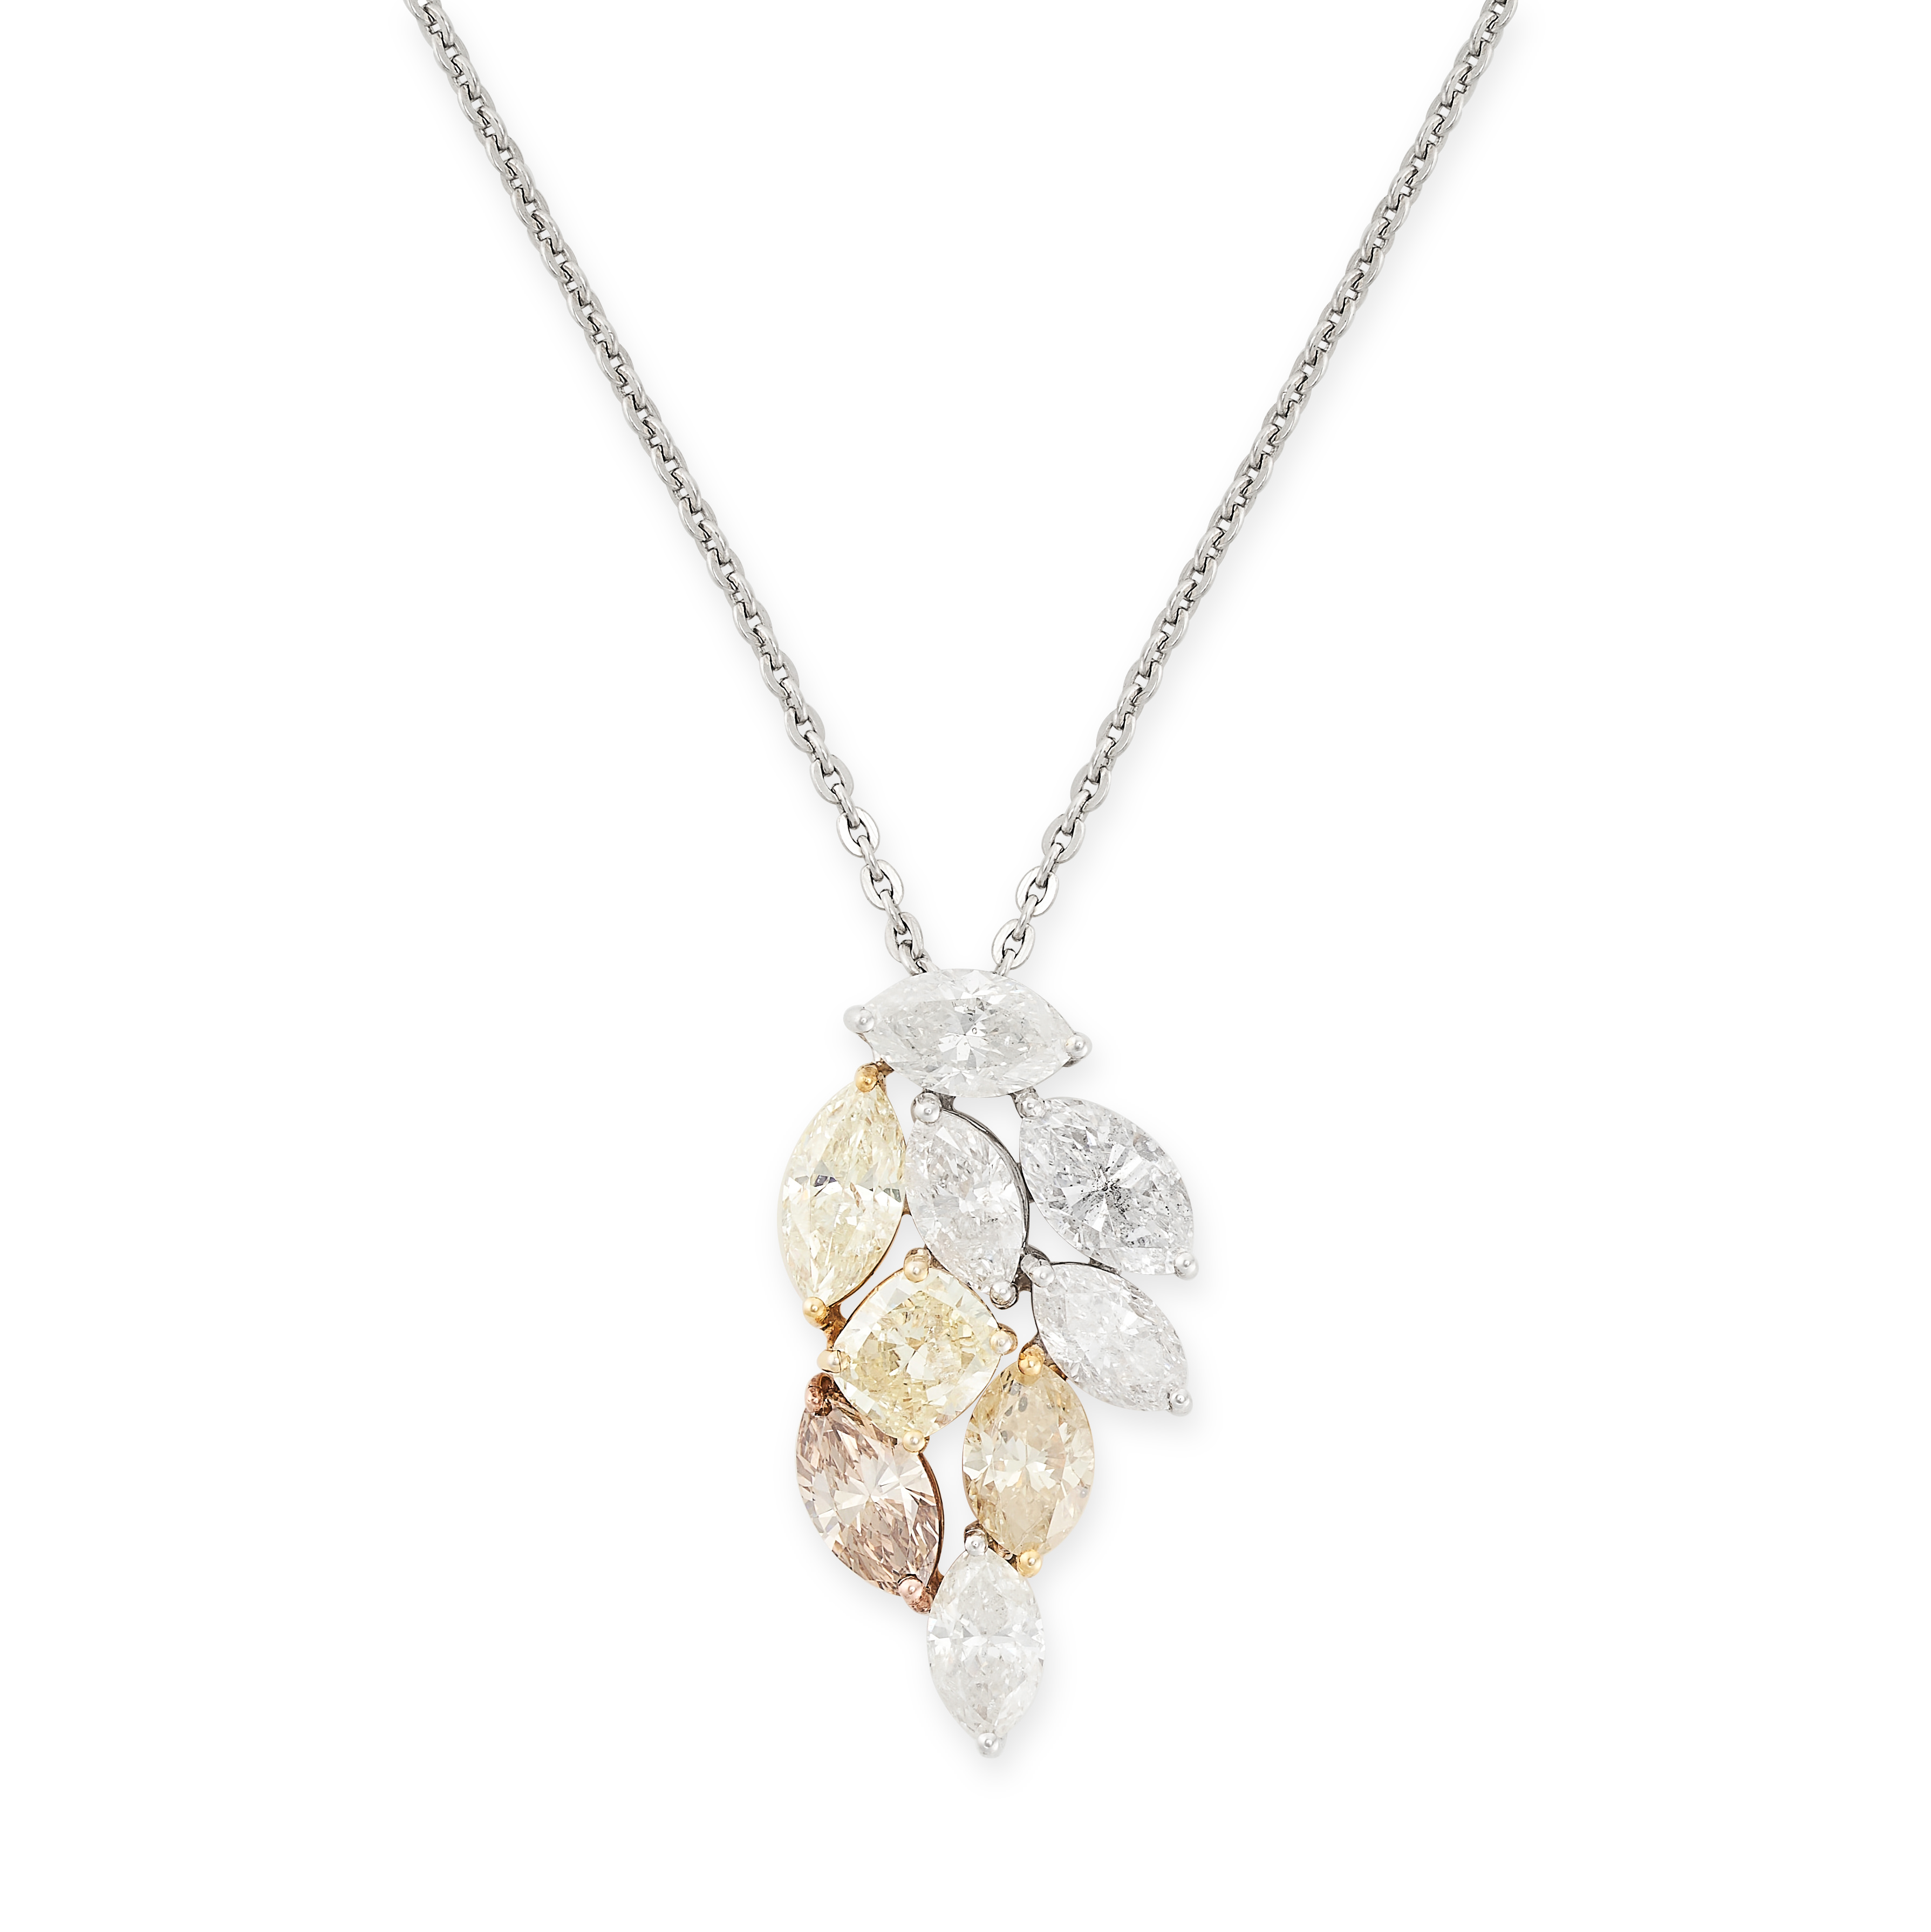 A DIAMOND CLUSTER PENDANT NECKLACE the pendant comprising a cluster of cushion and marquise cut